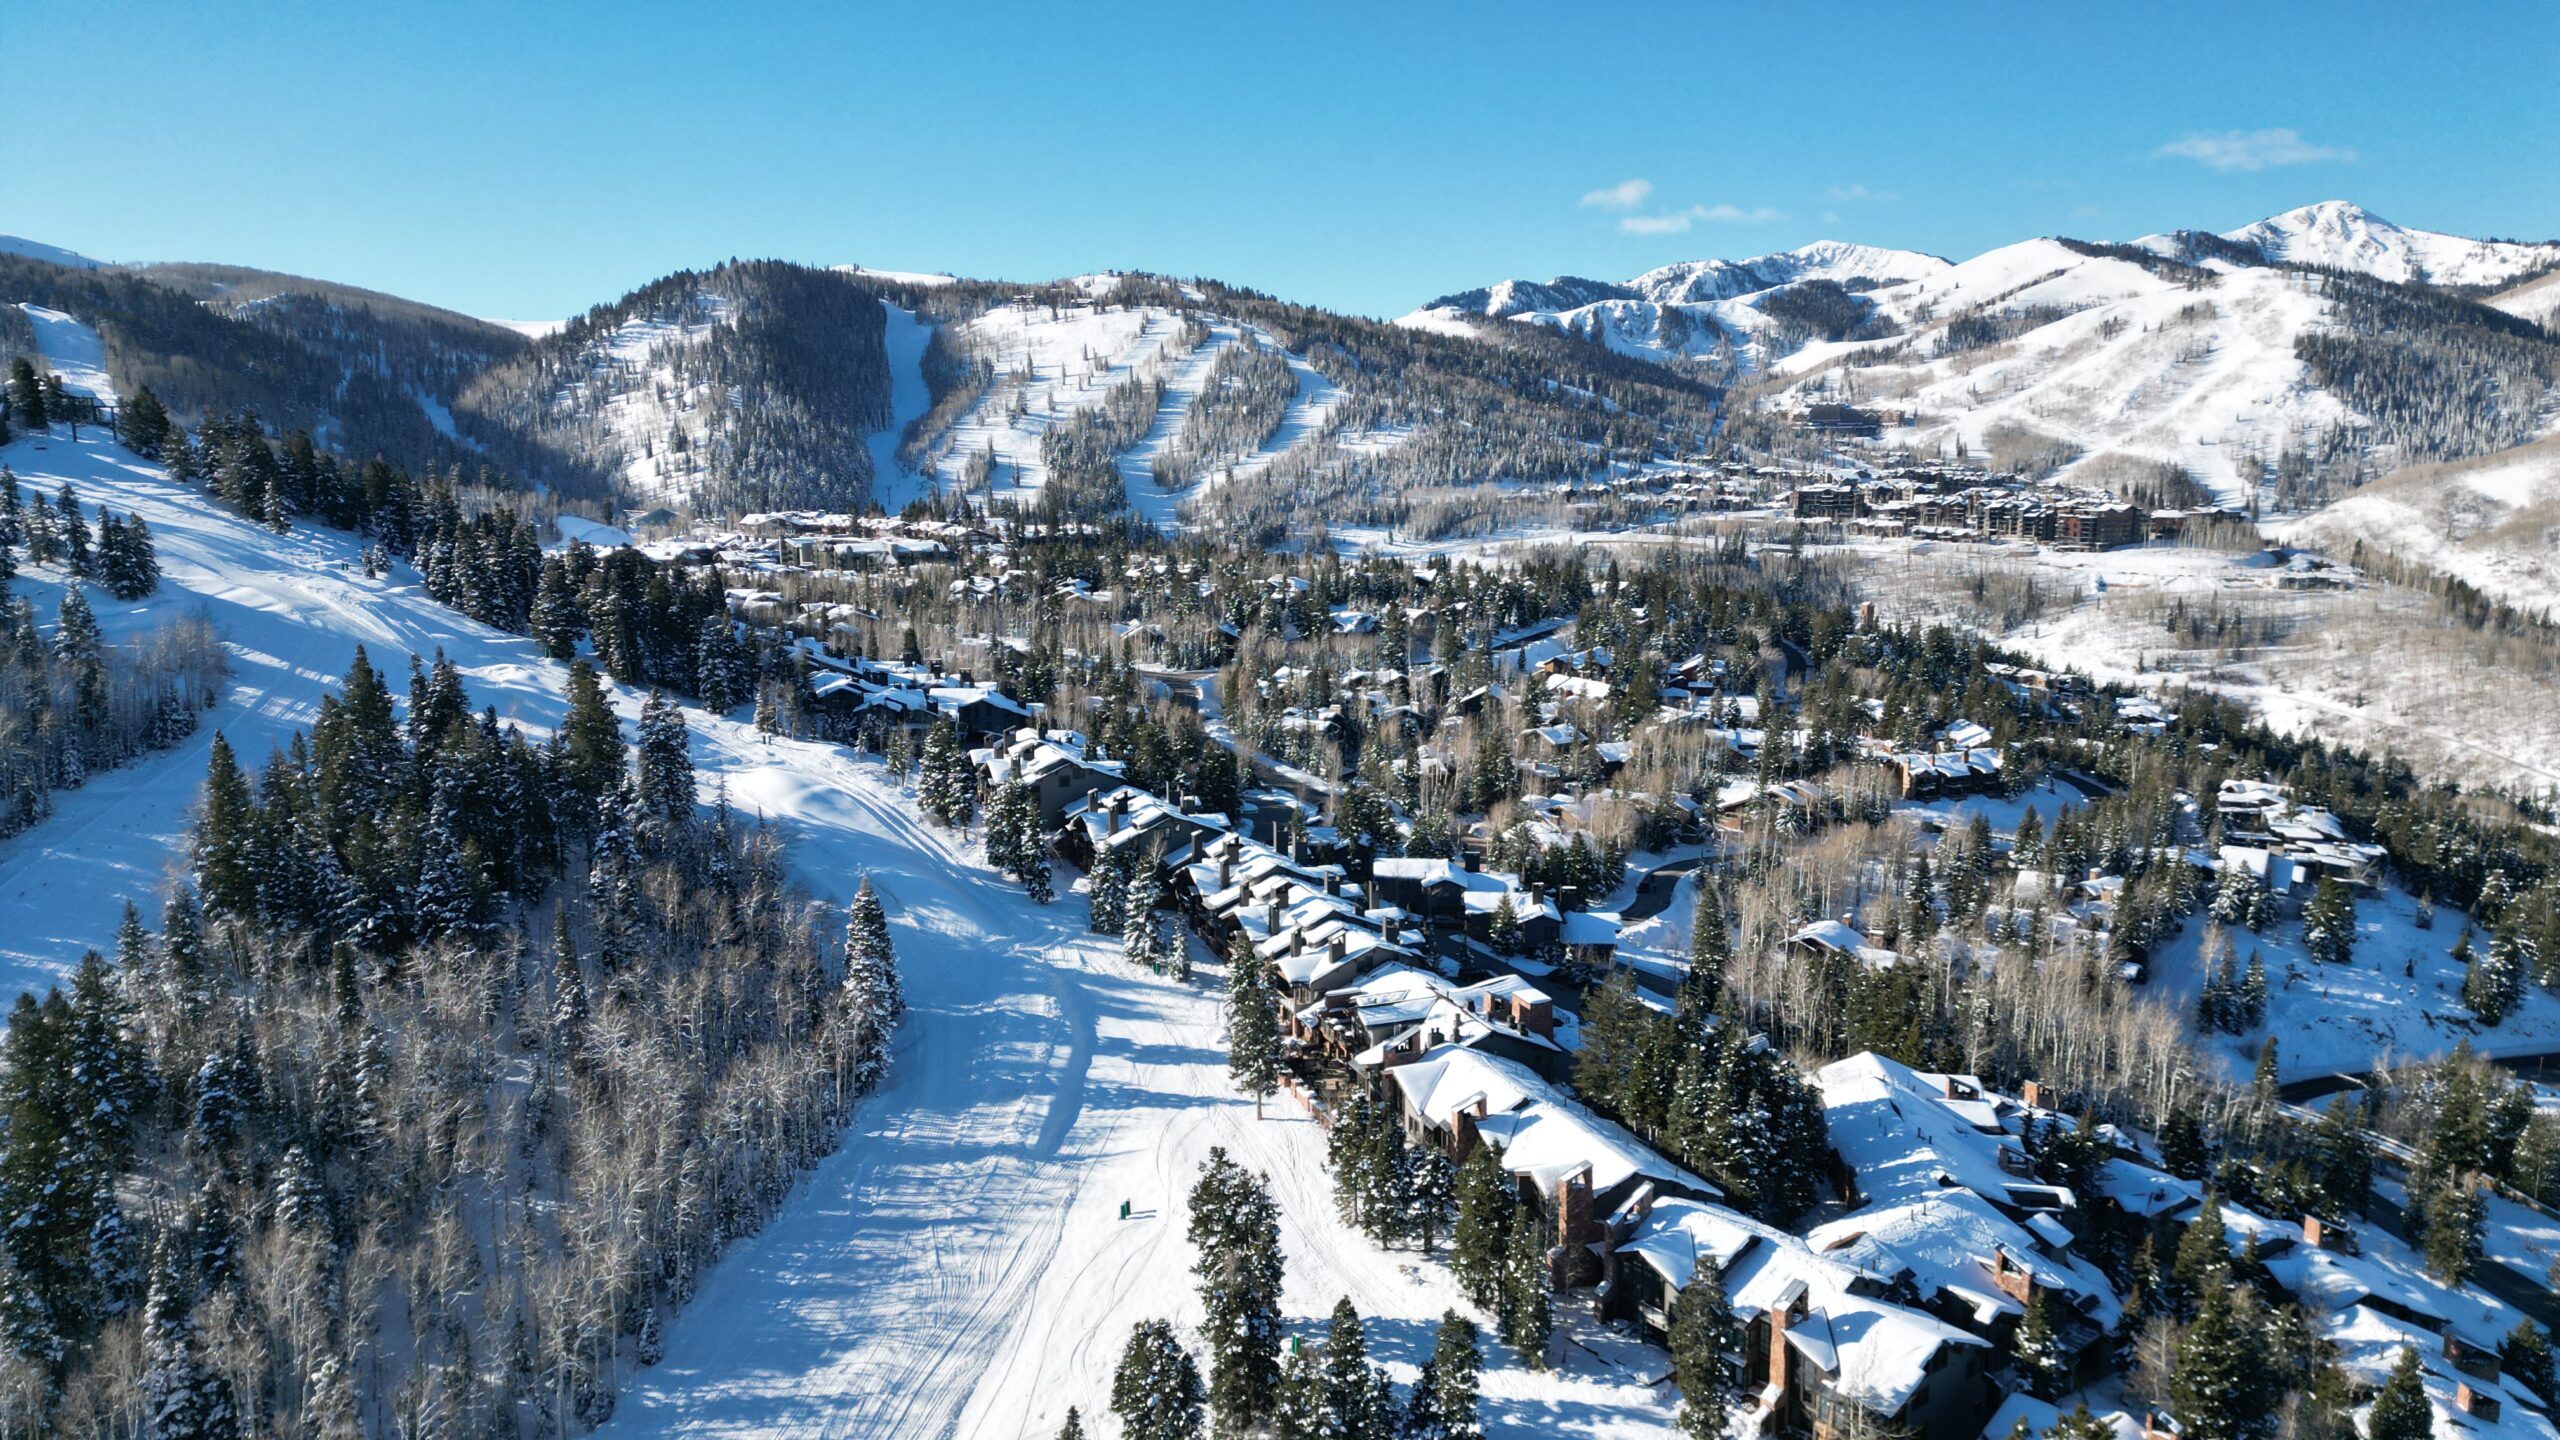 Single day lift tickets at Deer Valley Resort valued at 289 for 2324